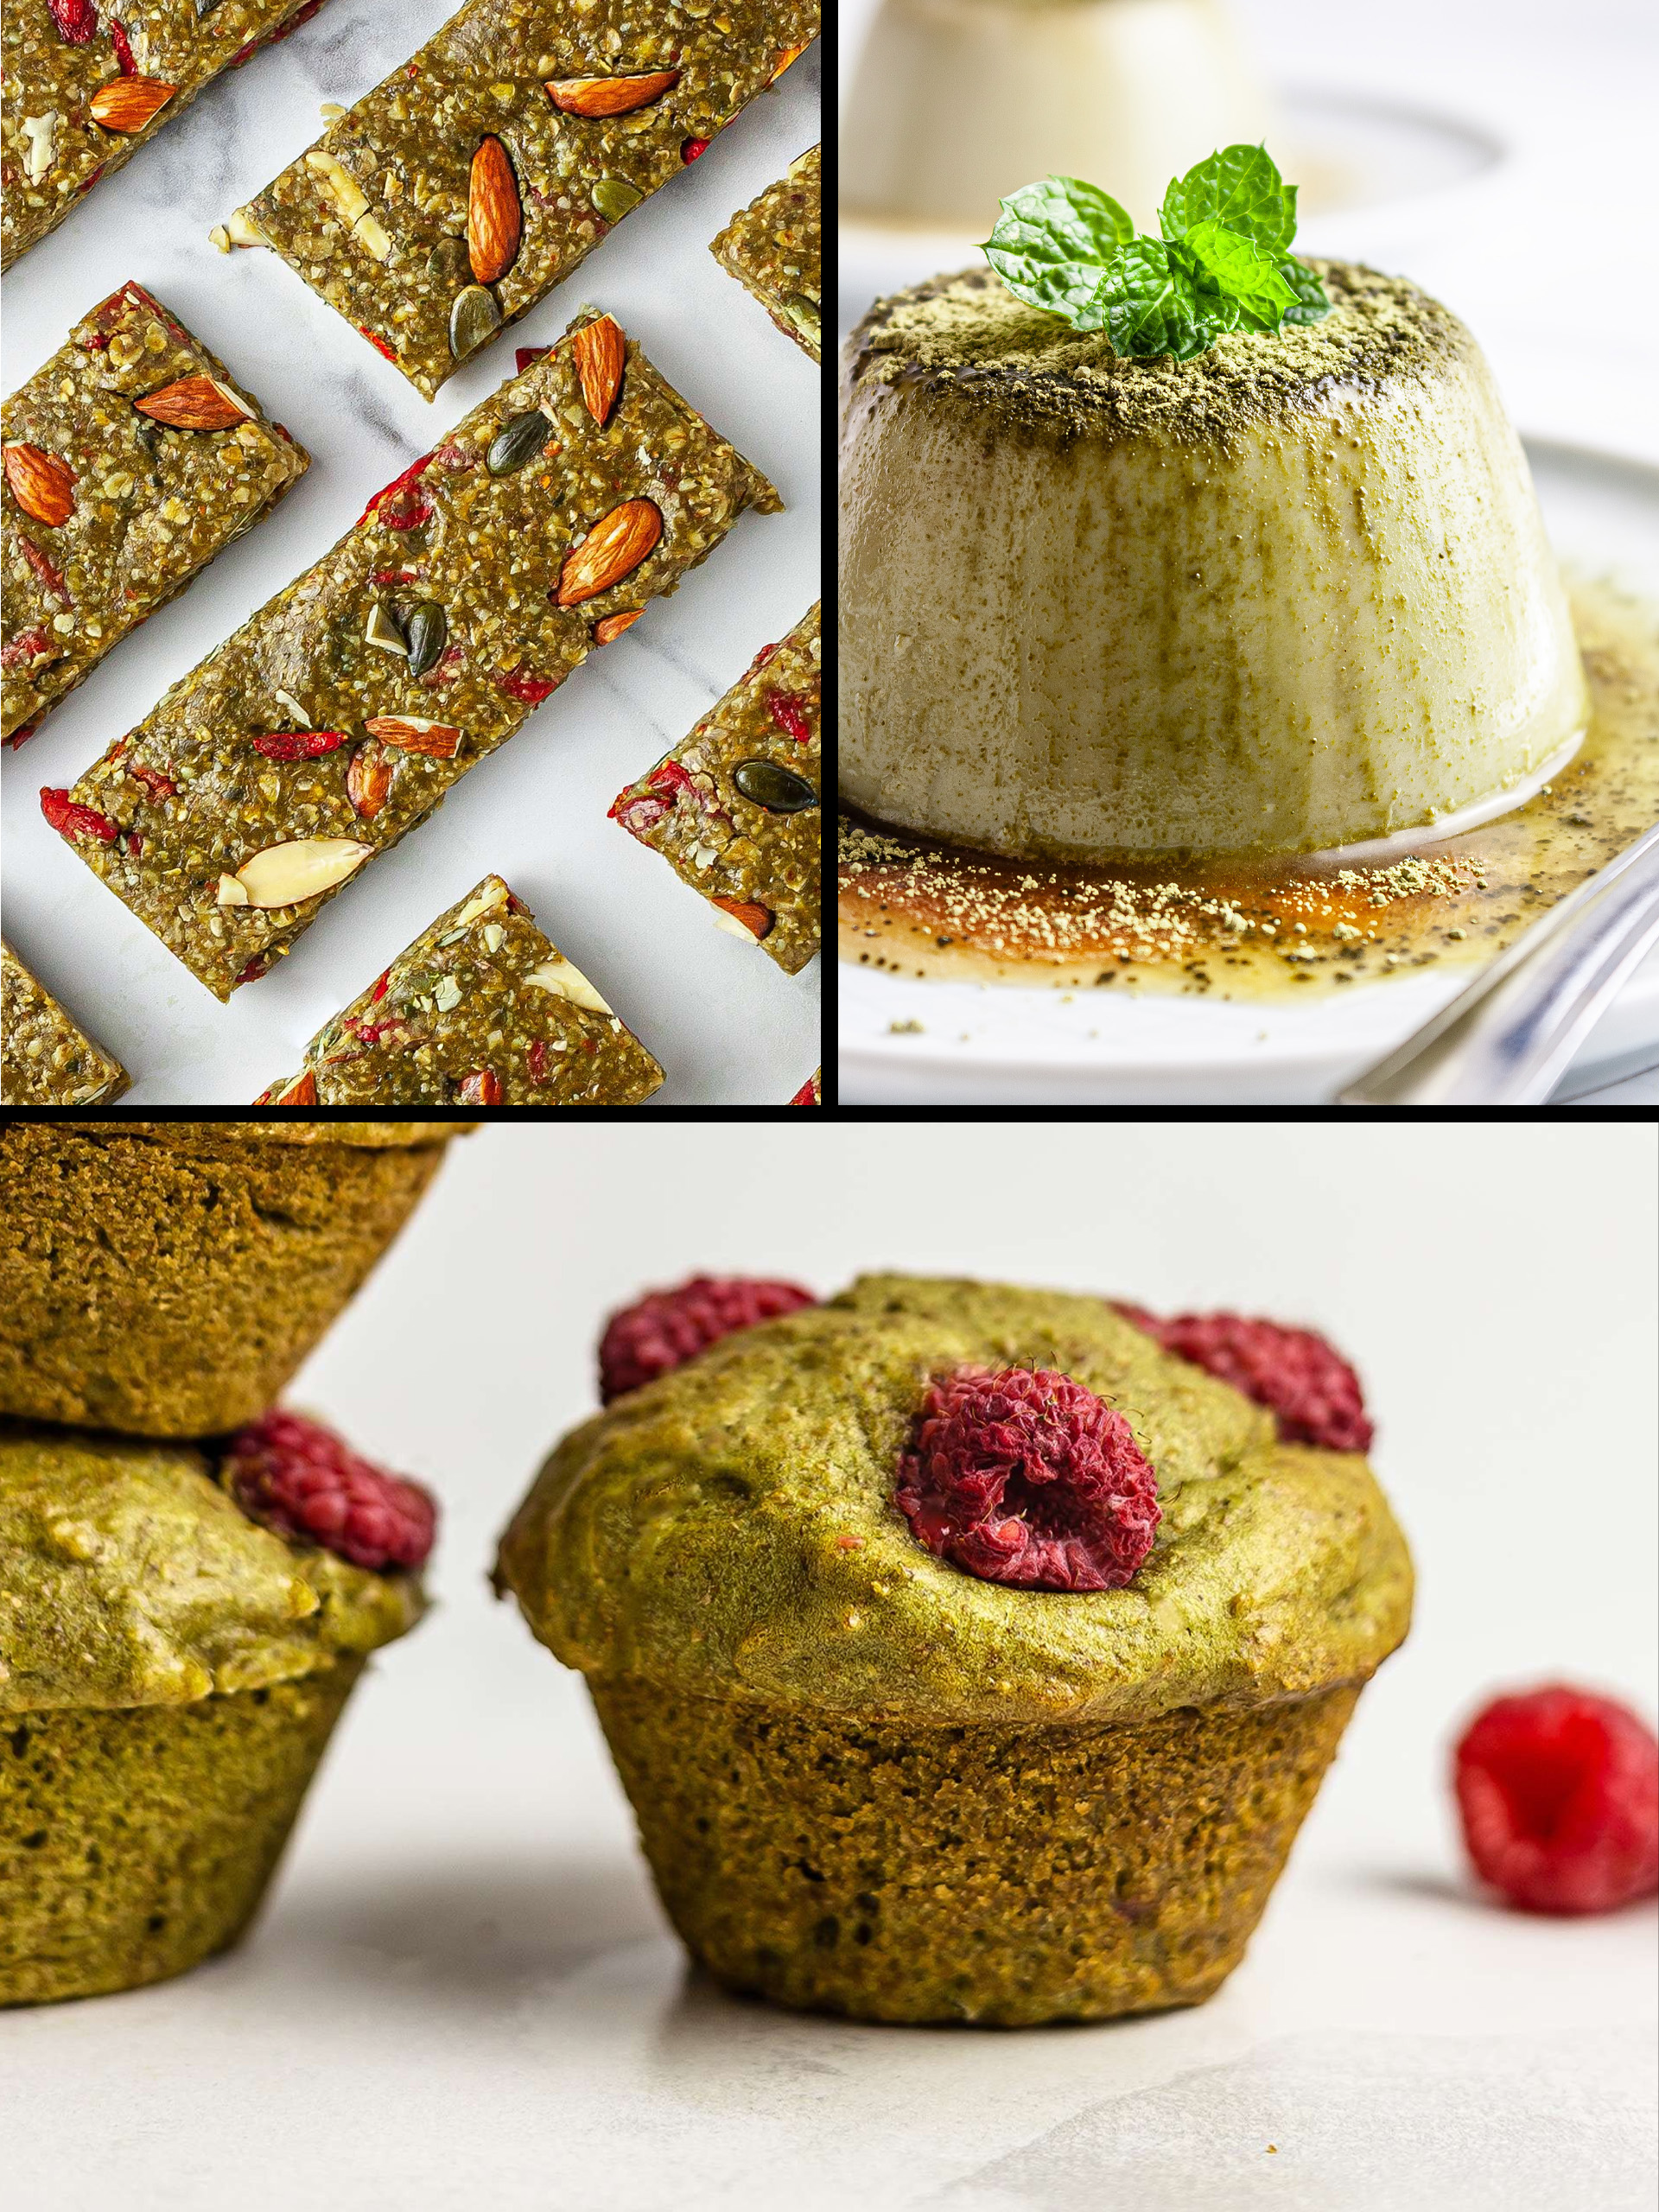 10 Delicious Treats Made with Matcha